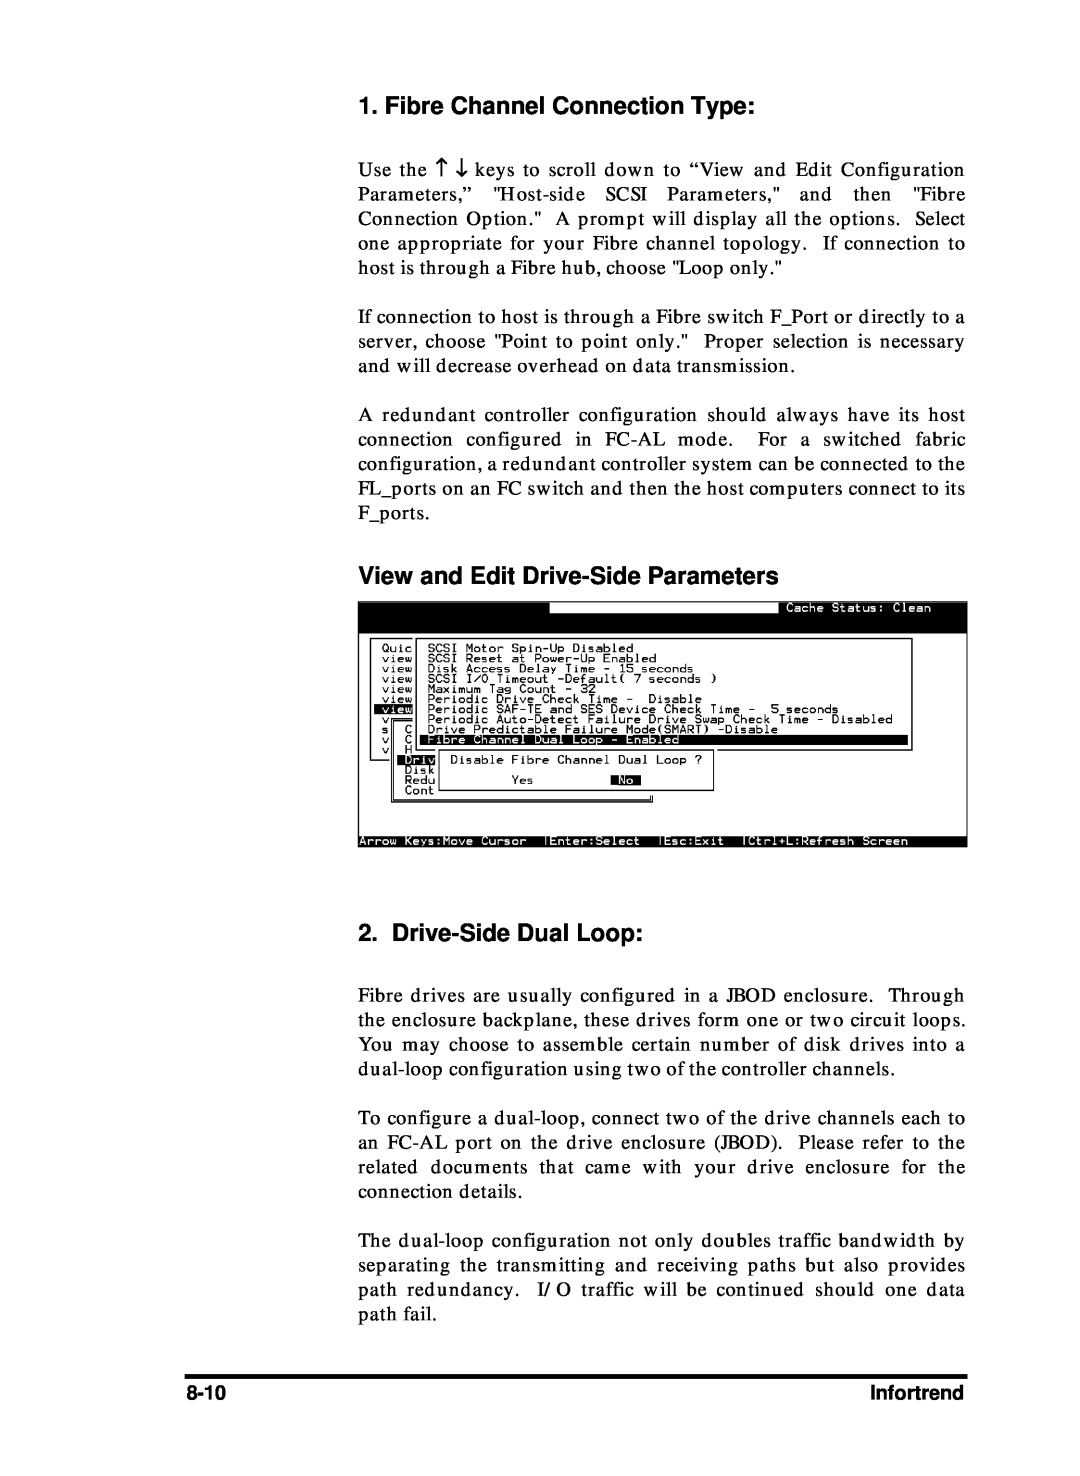 Compaq Infortrend manual Fibre Channel Connection Type, View and Edit Drive-Side Parameters 2. Drive-Side Dual Loop 